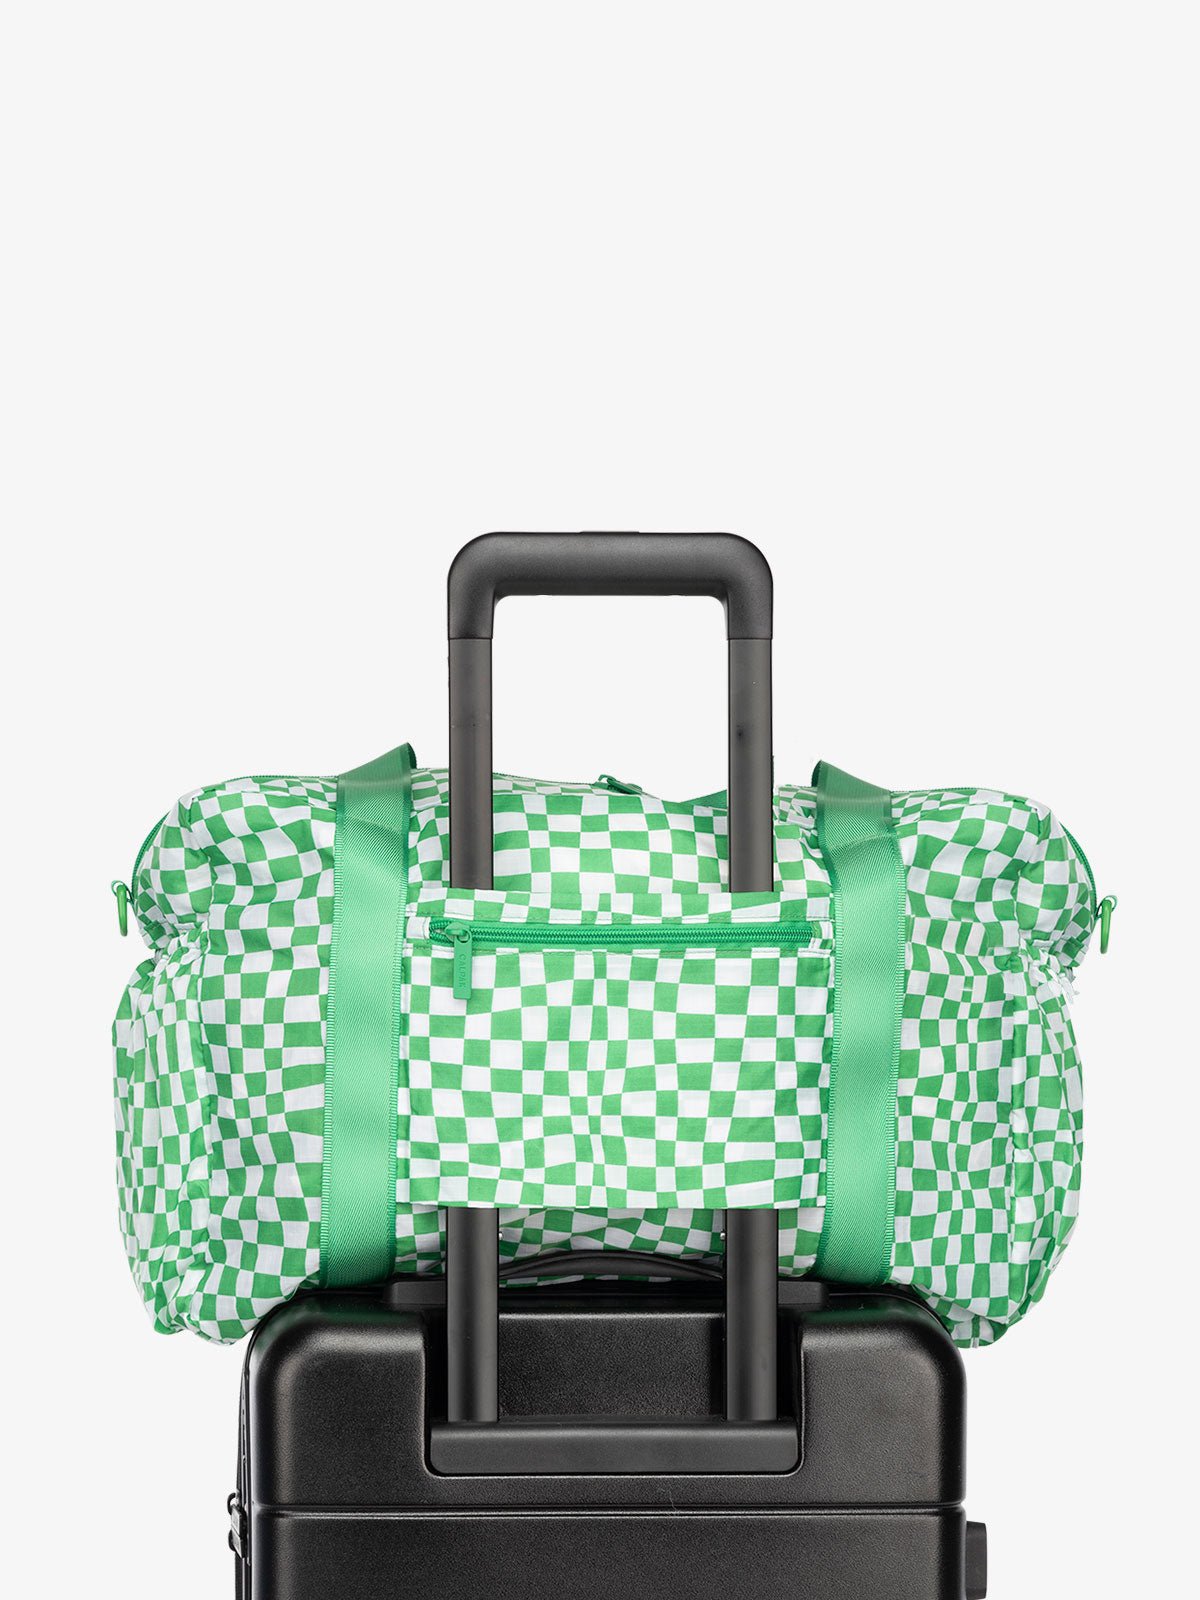 CALPAK Compakt nylon duffle bag with trolley sleeve and zippered pocket in green checkerboard pattern